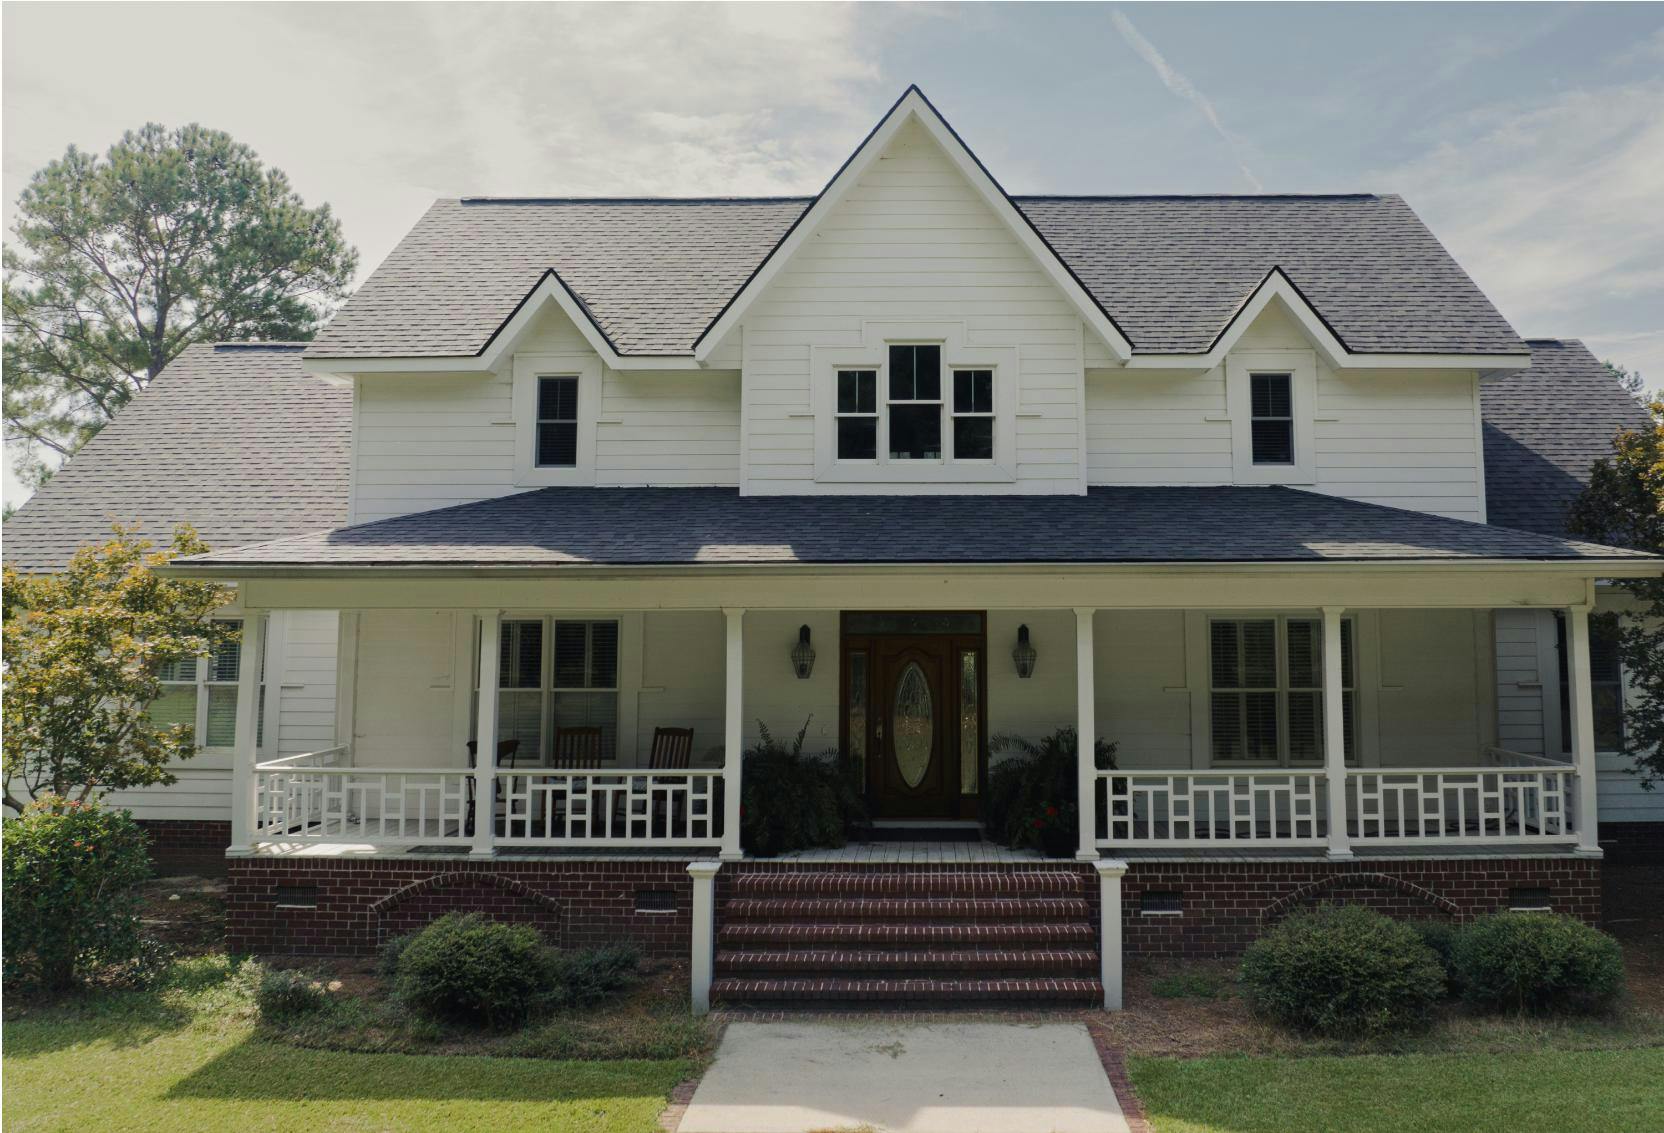 Home With Architectural Asphalt Shingles | Williamsburg Gray | Candler County Residental Roofers | Residential Roofing